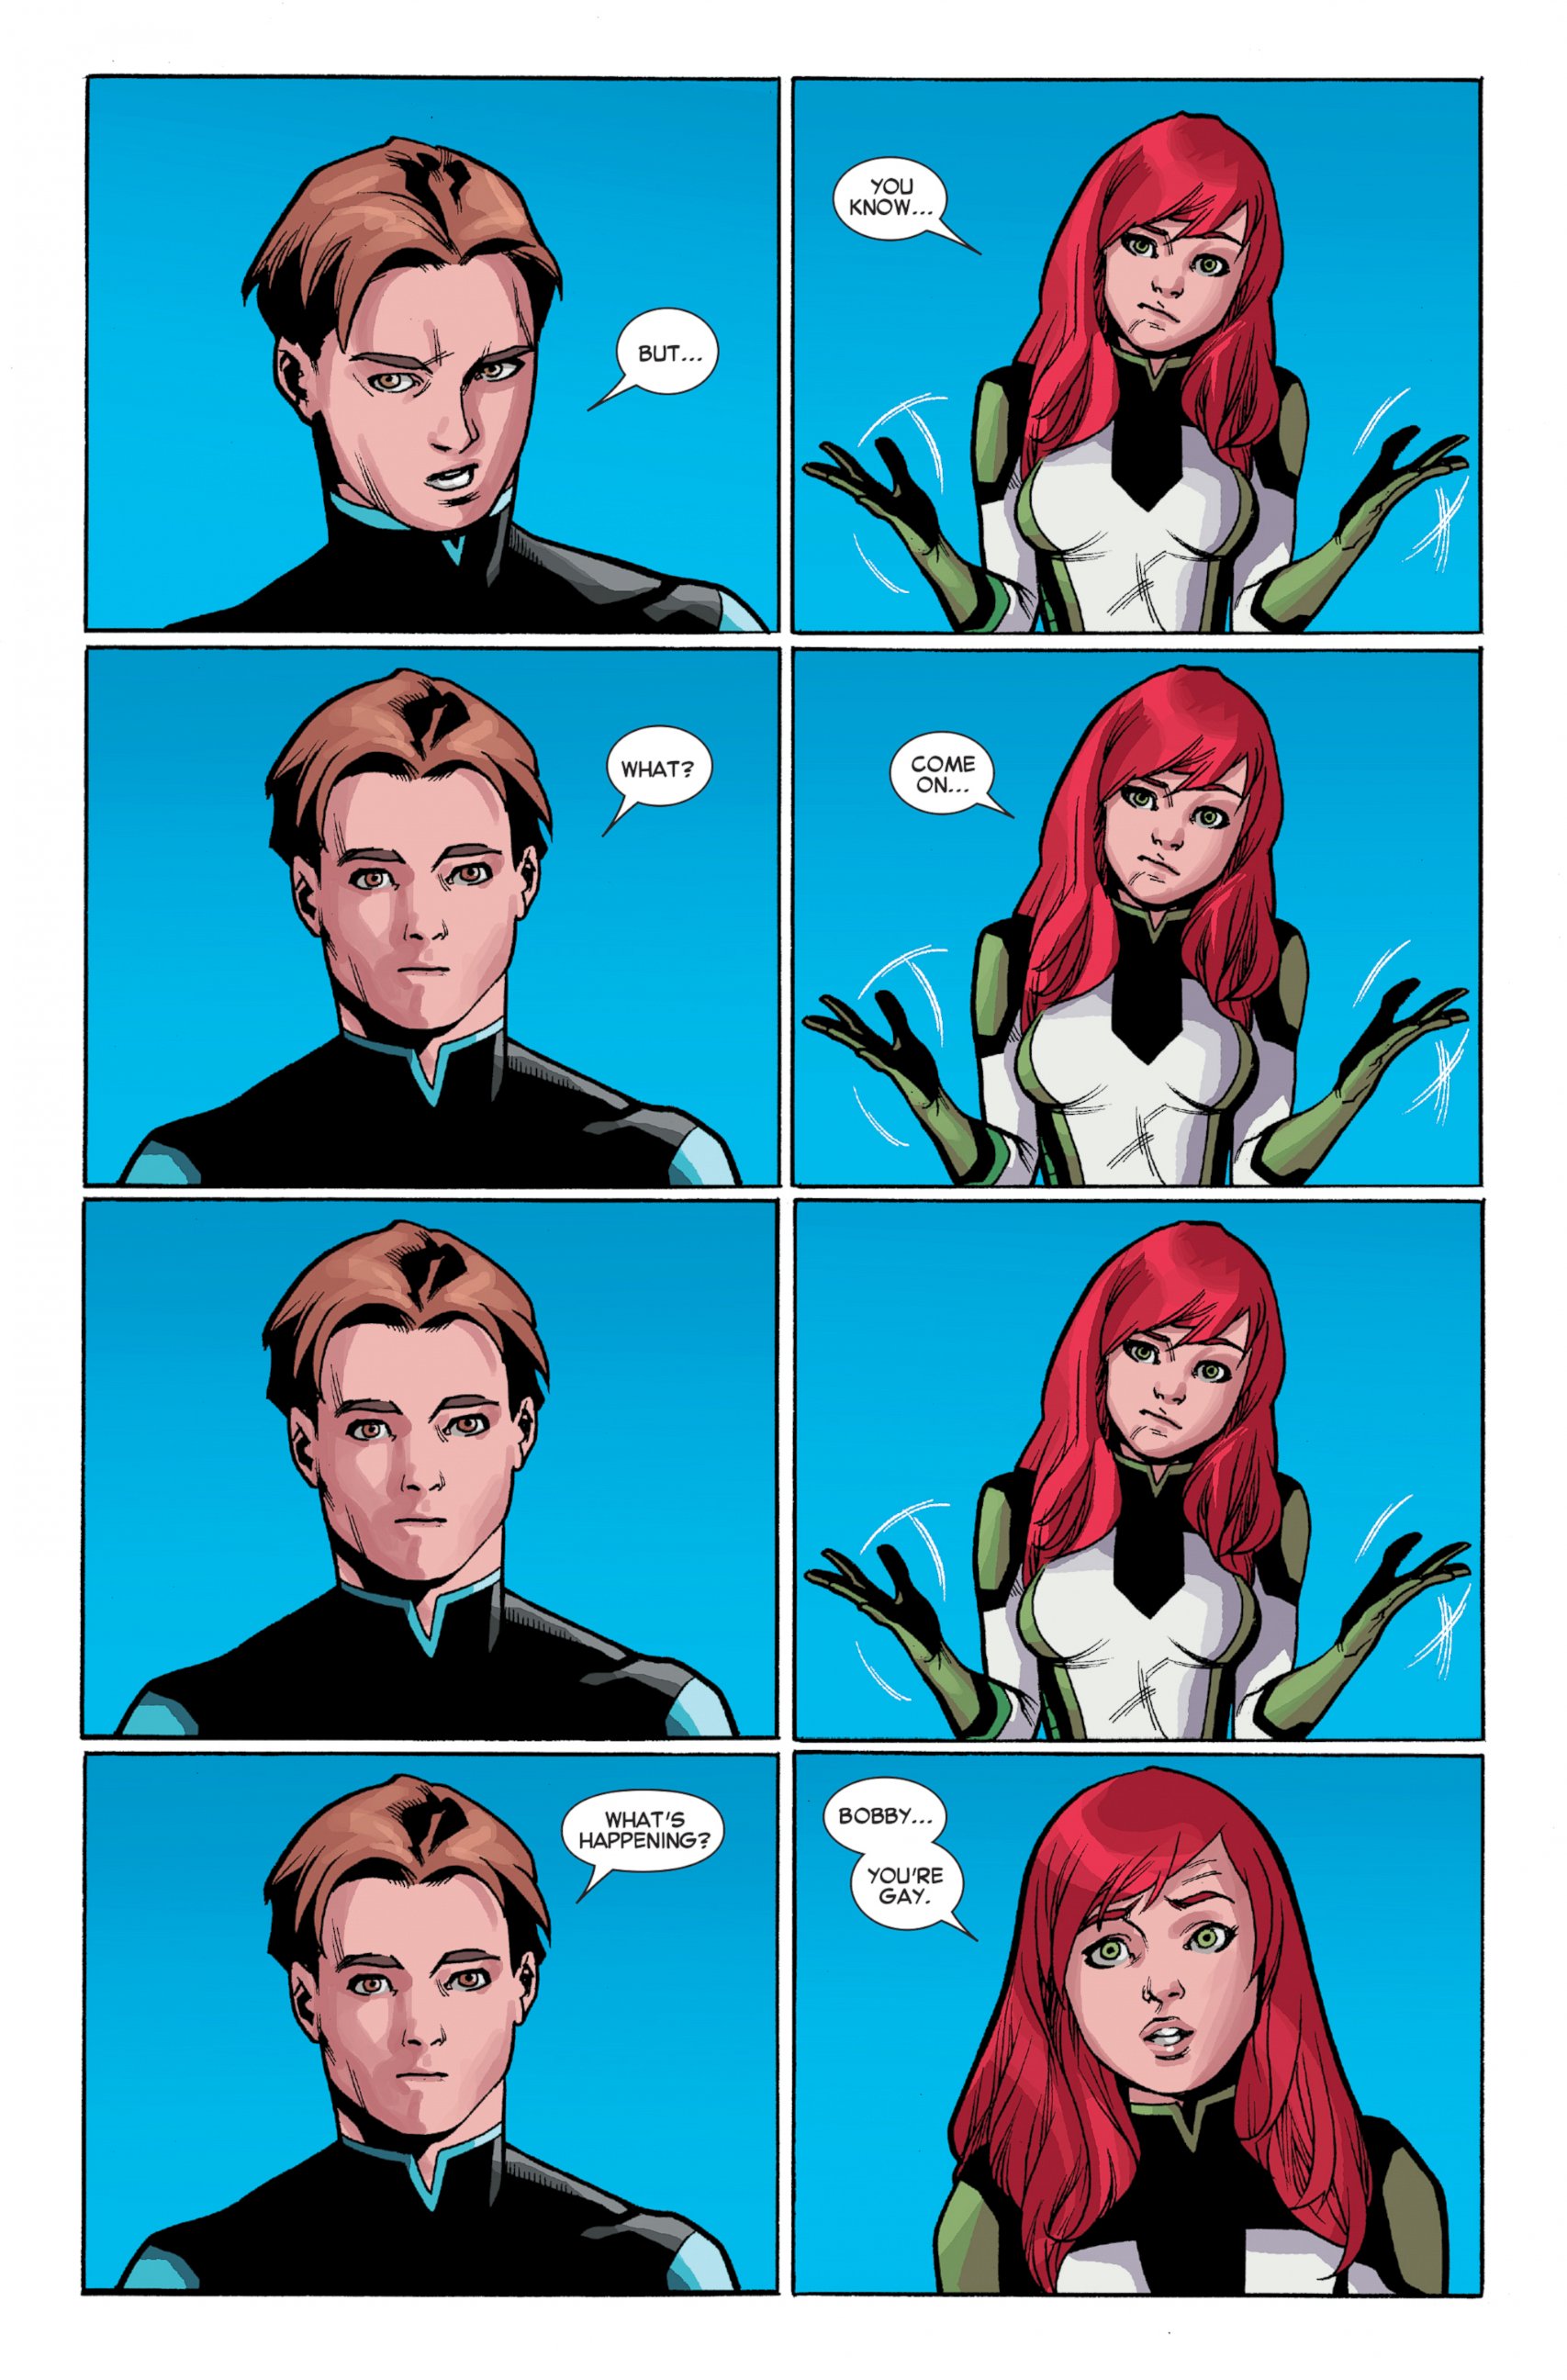 PHOTO: Original X-Men member Iceman comes out as gay in newest issue of the "All New X-Men #40."